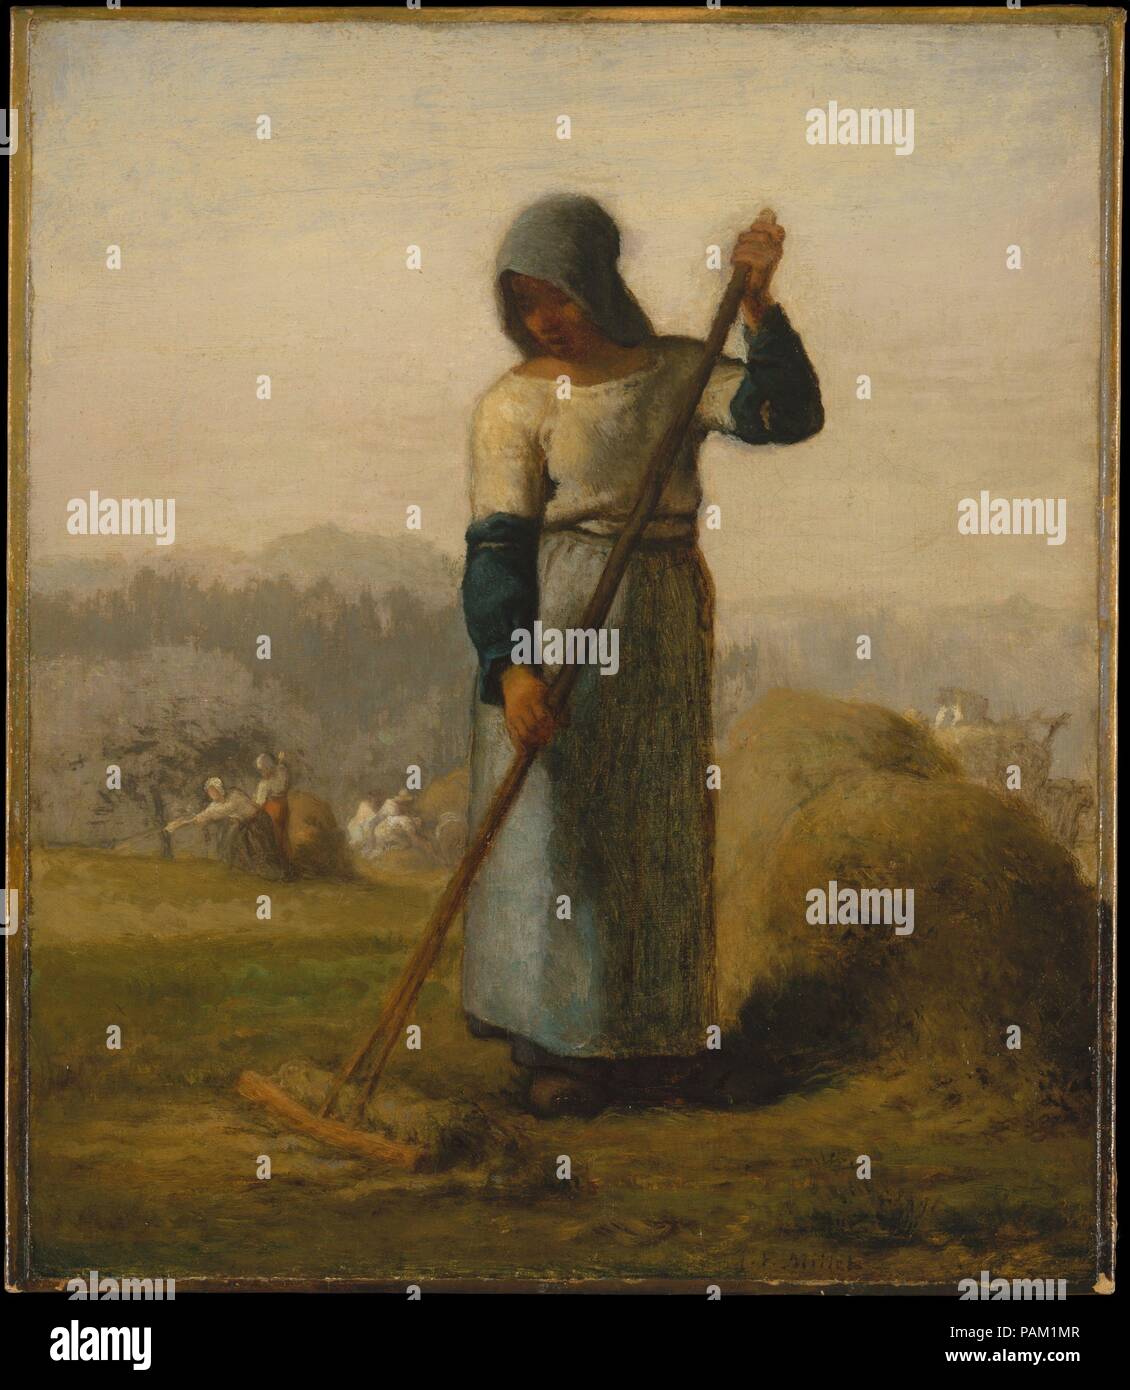 Woman with a Rake. Artist: Jean-François Millet (French, Gruchy 1814-1875 Barbizon). Dimensions: 15 5/8 x 13 1/2 in. (39.7 x 34.3 cm). Date: probably 1856-57.  Millet first treated this subject in a woodcut, one of ten in the series <i>Labors of the Fields</i> that were published in a popular periodical in 1853. The art dealer Martinet, in whose gallery such avant-garde artists as Courbet and Manet exhibited, included this painting in a show in 1860. Museum: Metropolitan Museum of Art, New York, USA. Stock Photo